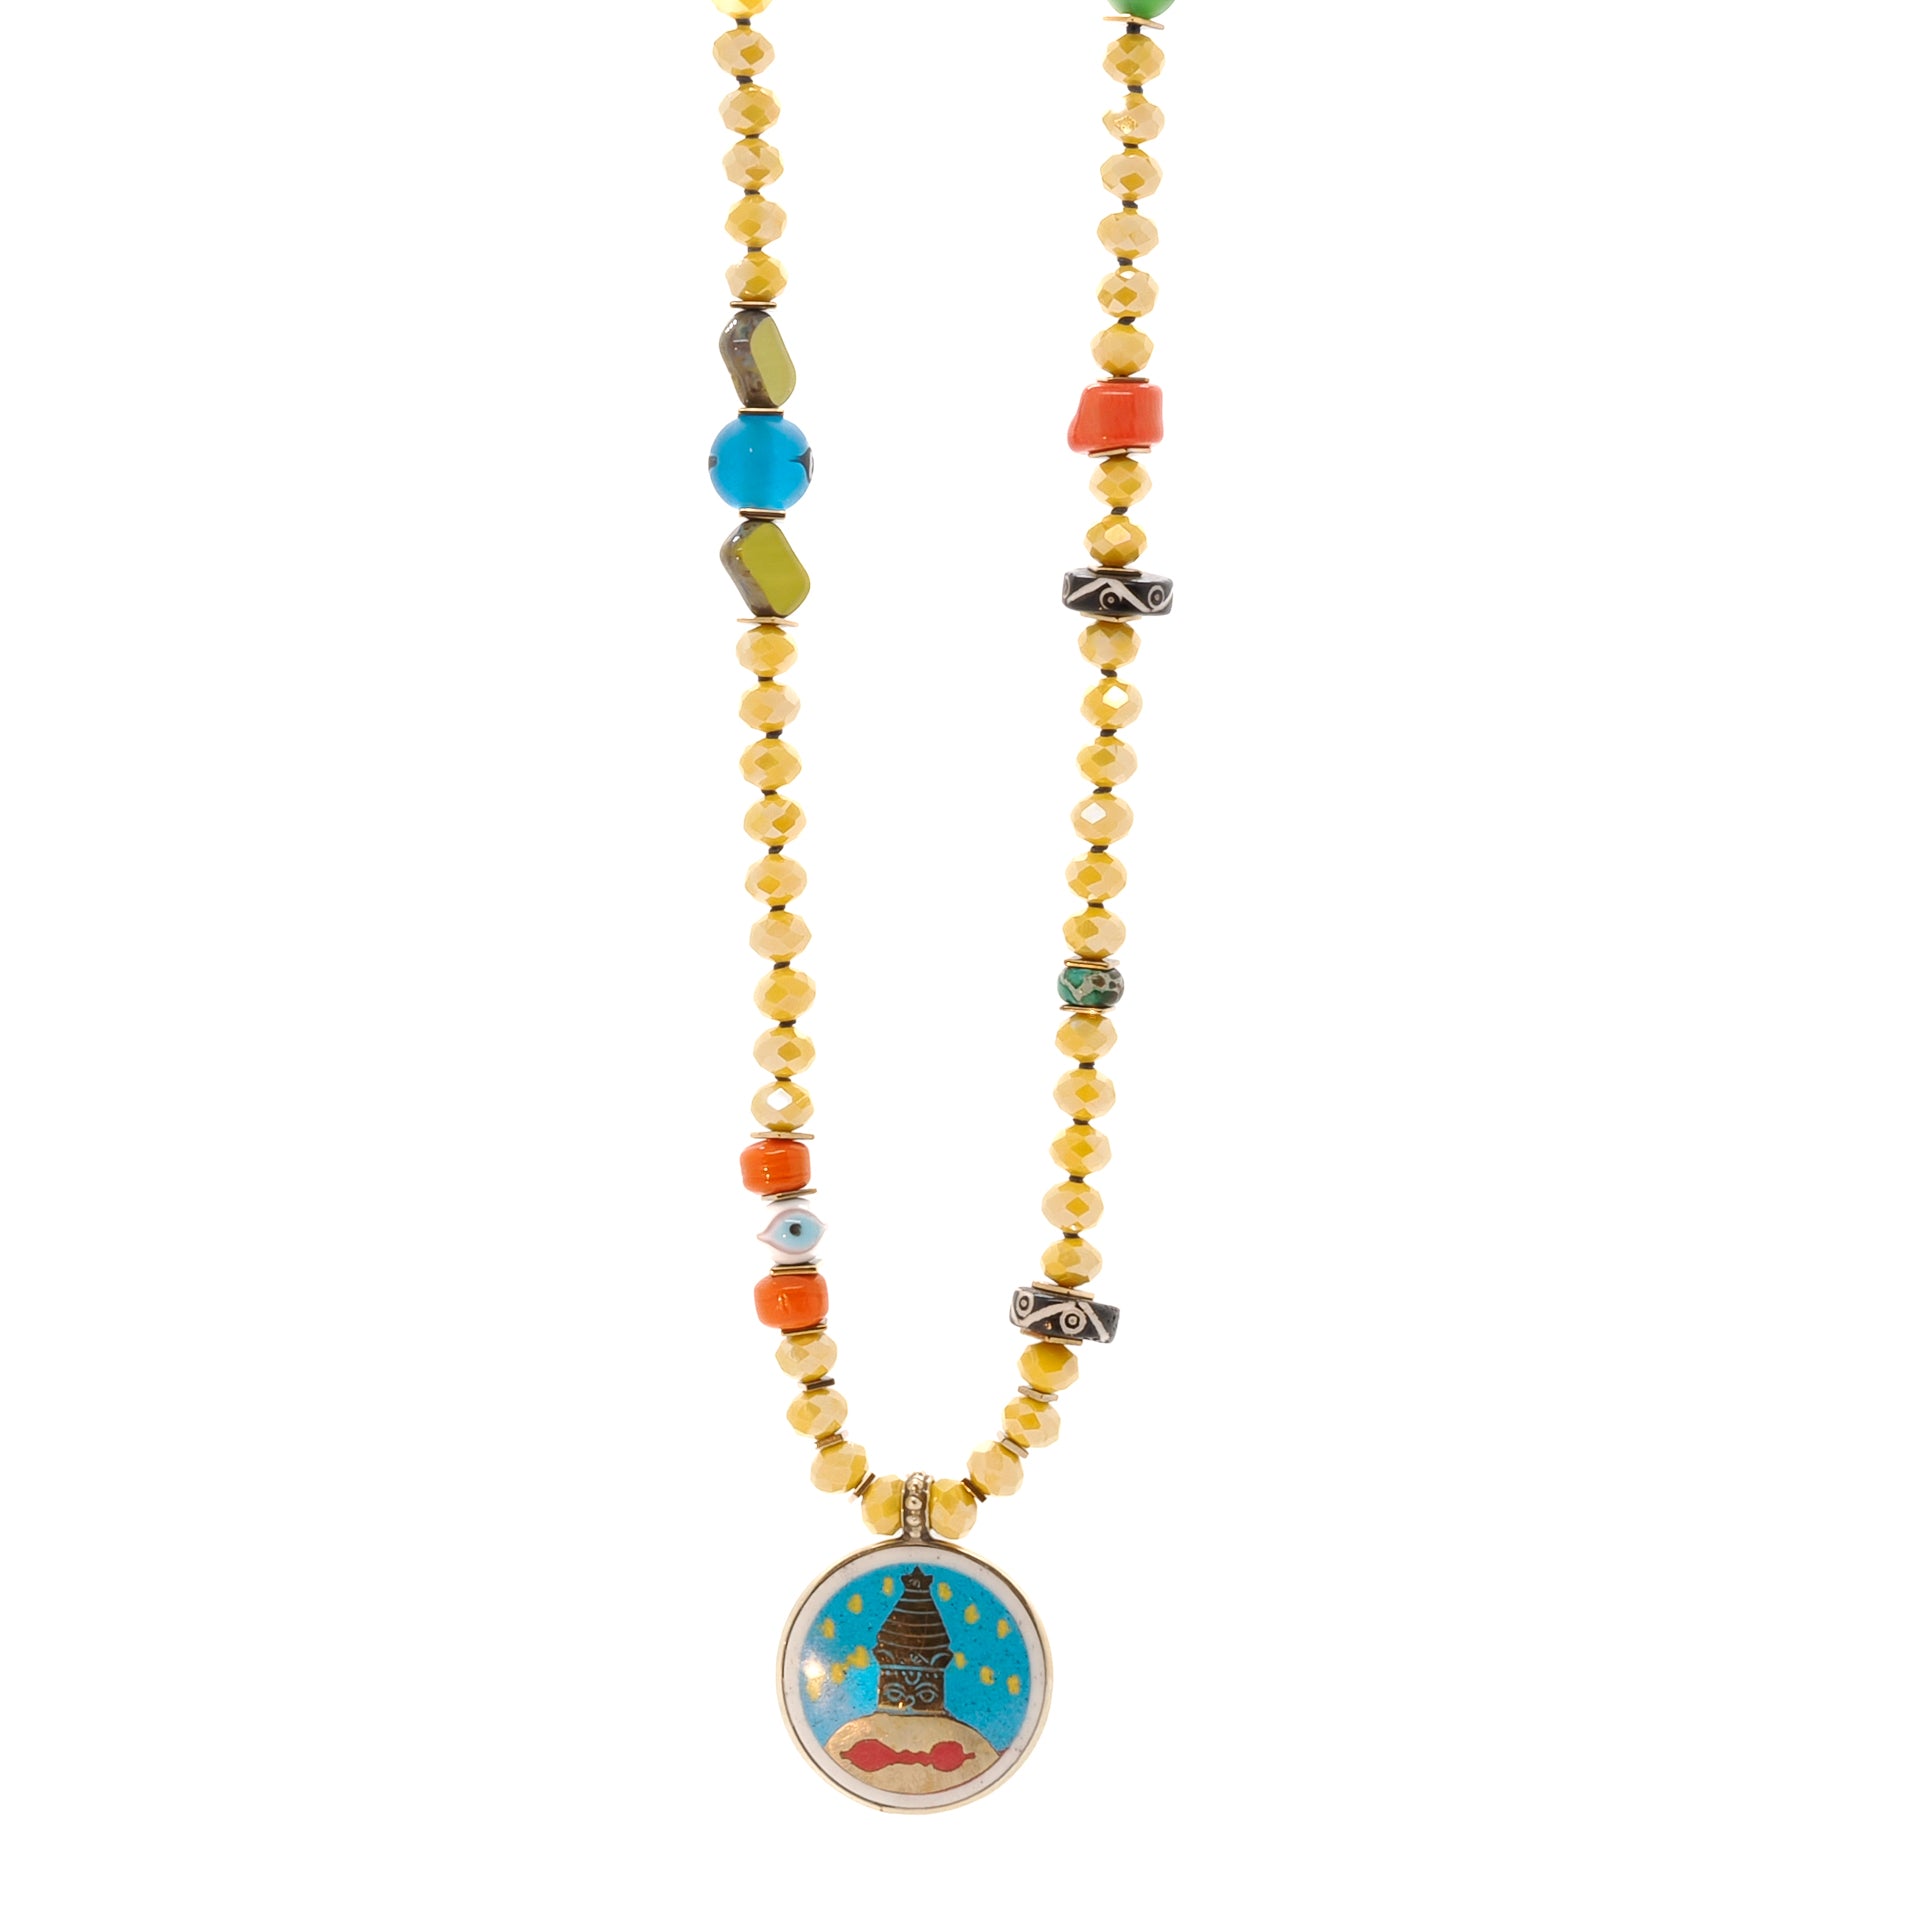 Find spiritual balance and protection with the Yoga Serenity Necklace&#39;s Buddha Eyes and evil eye beads.